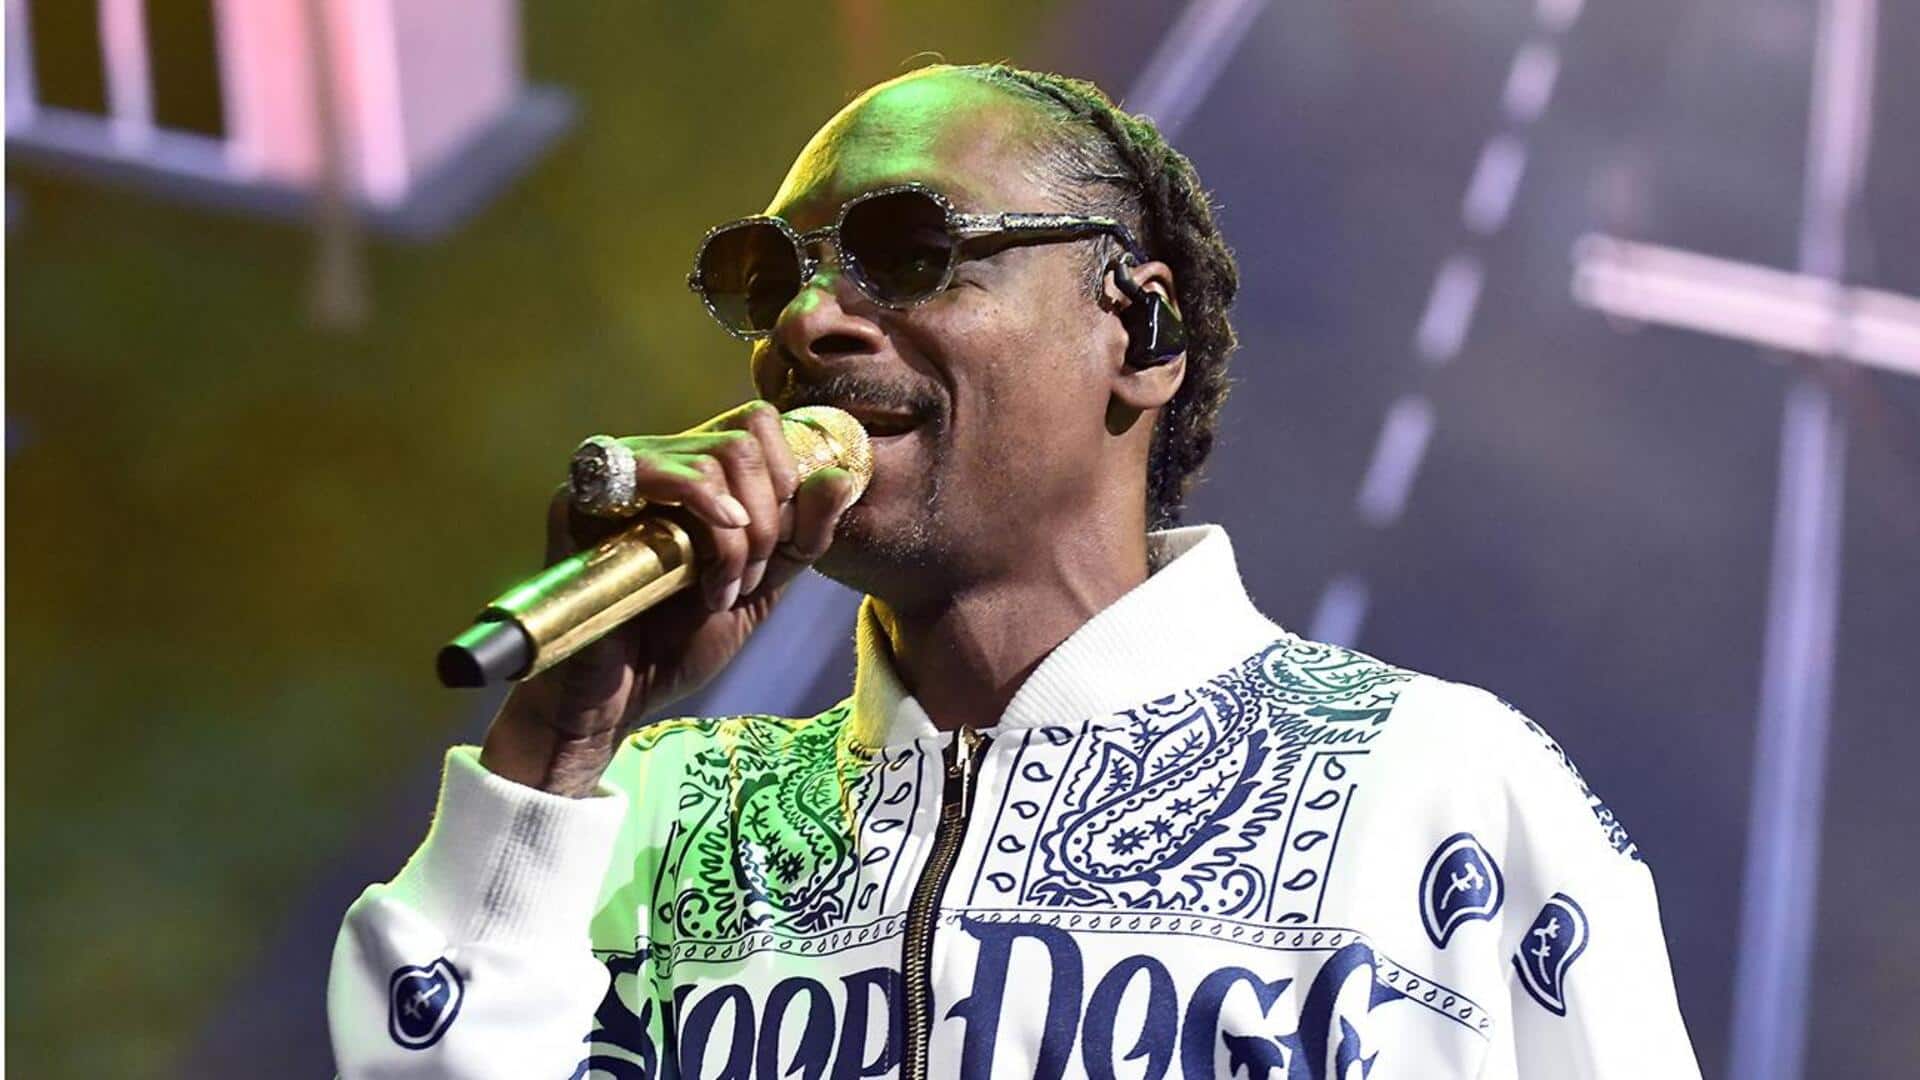 Snoop Dogg to join NBC's Olympics coverage in Paris